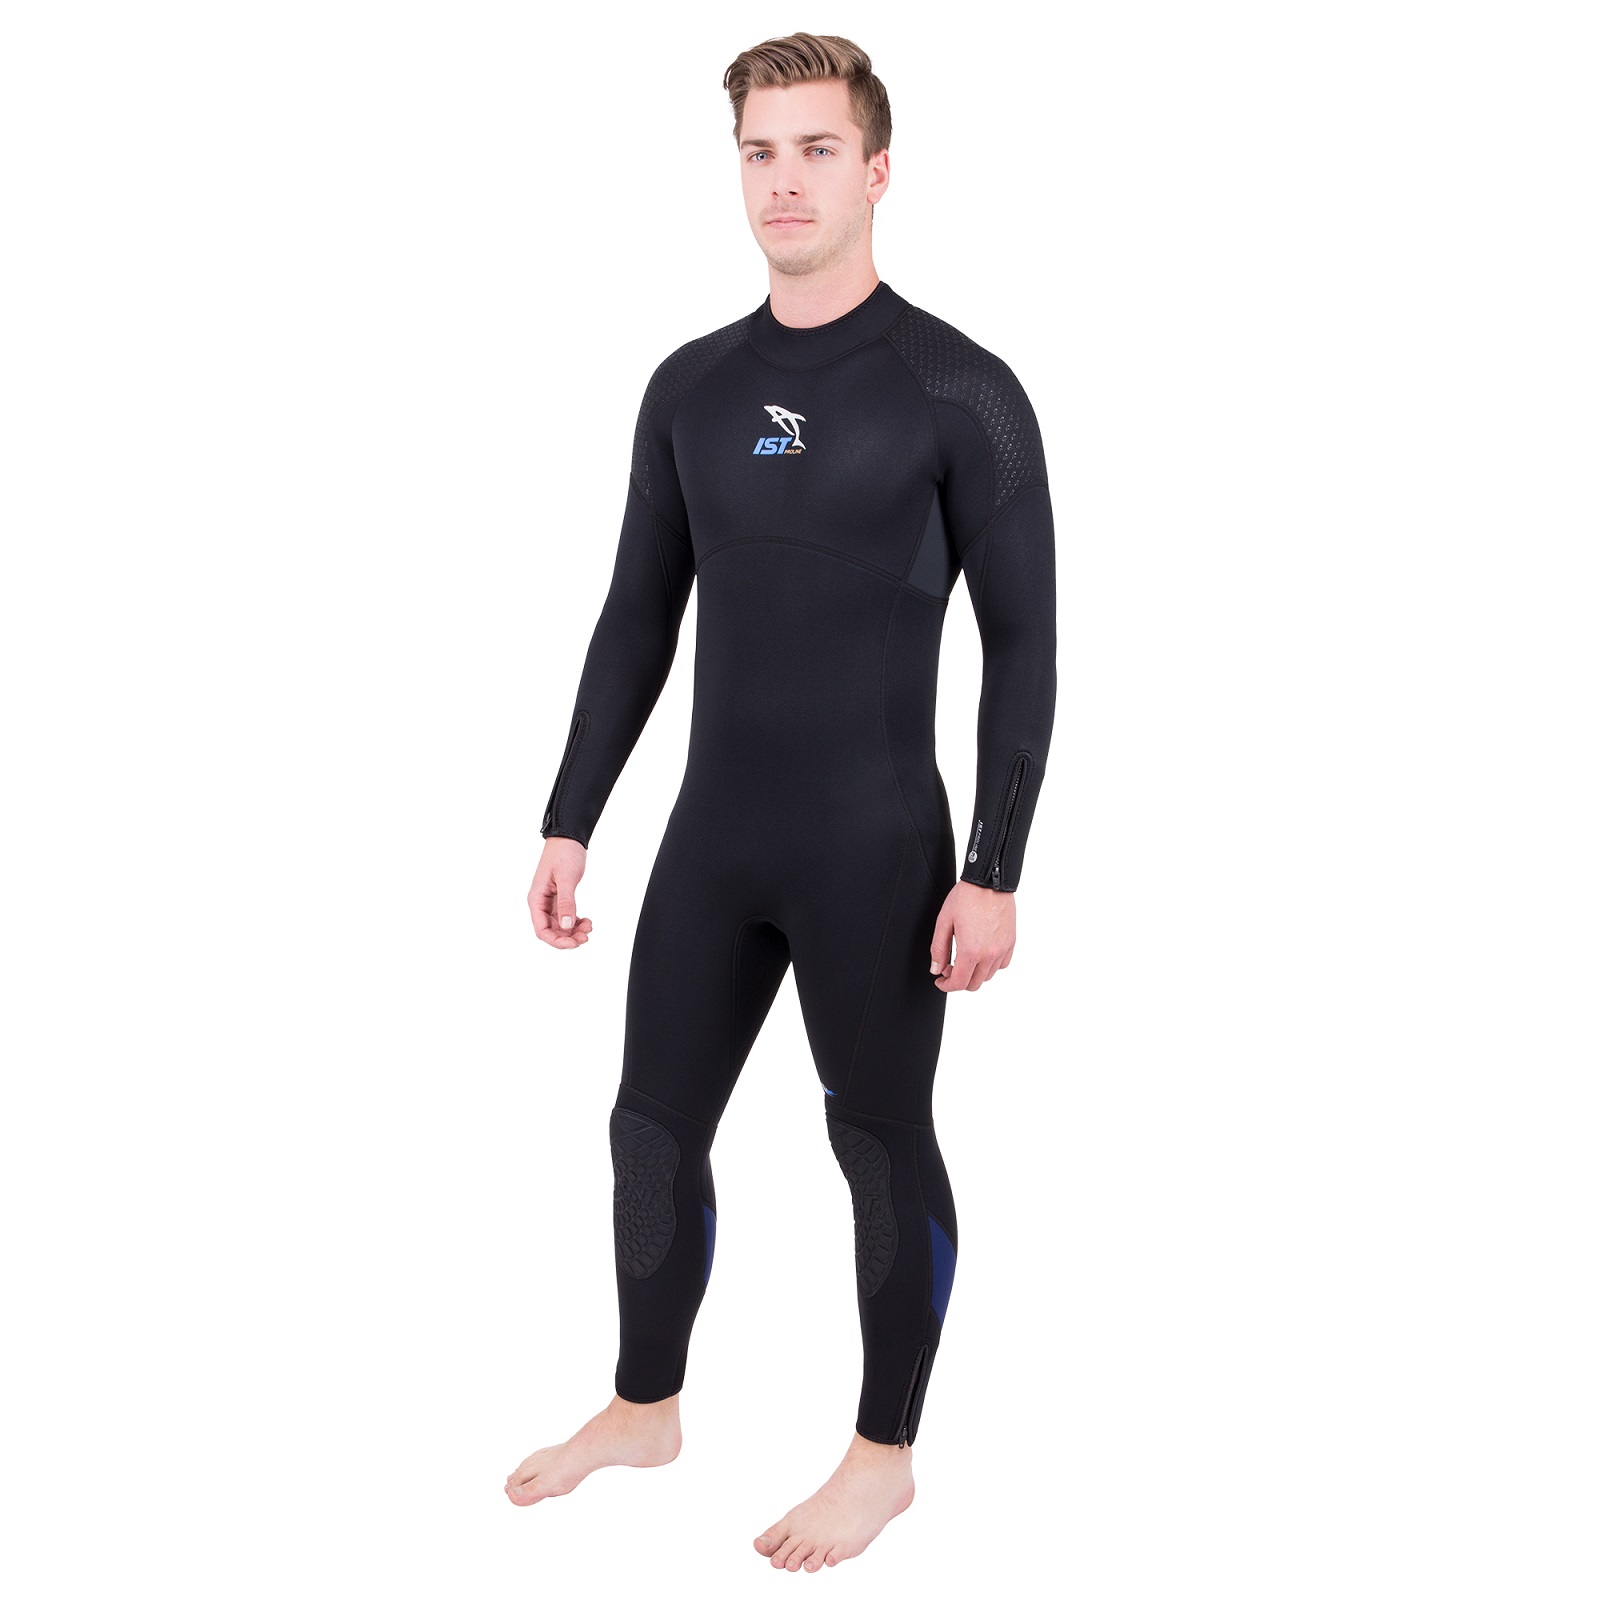 IST WS8 3mm 5mm 7mm Premium Diving Jumpsuit with Super-Stretch Panels for Men